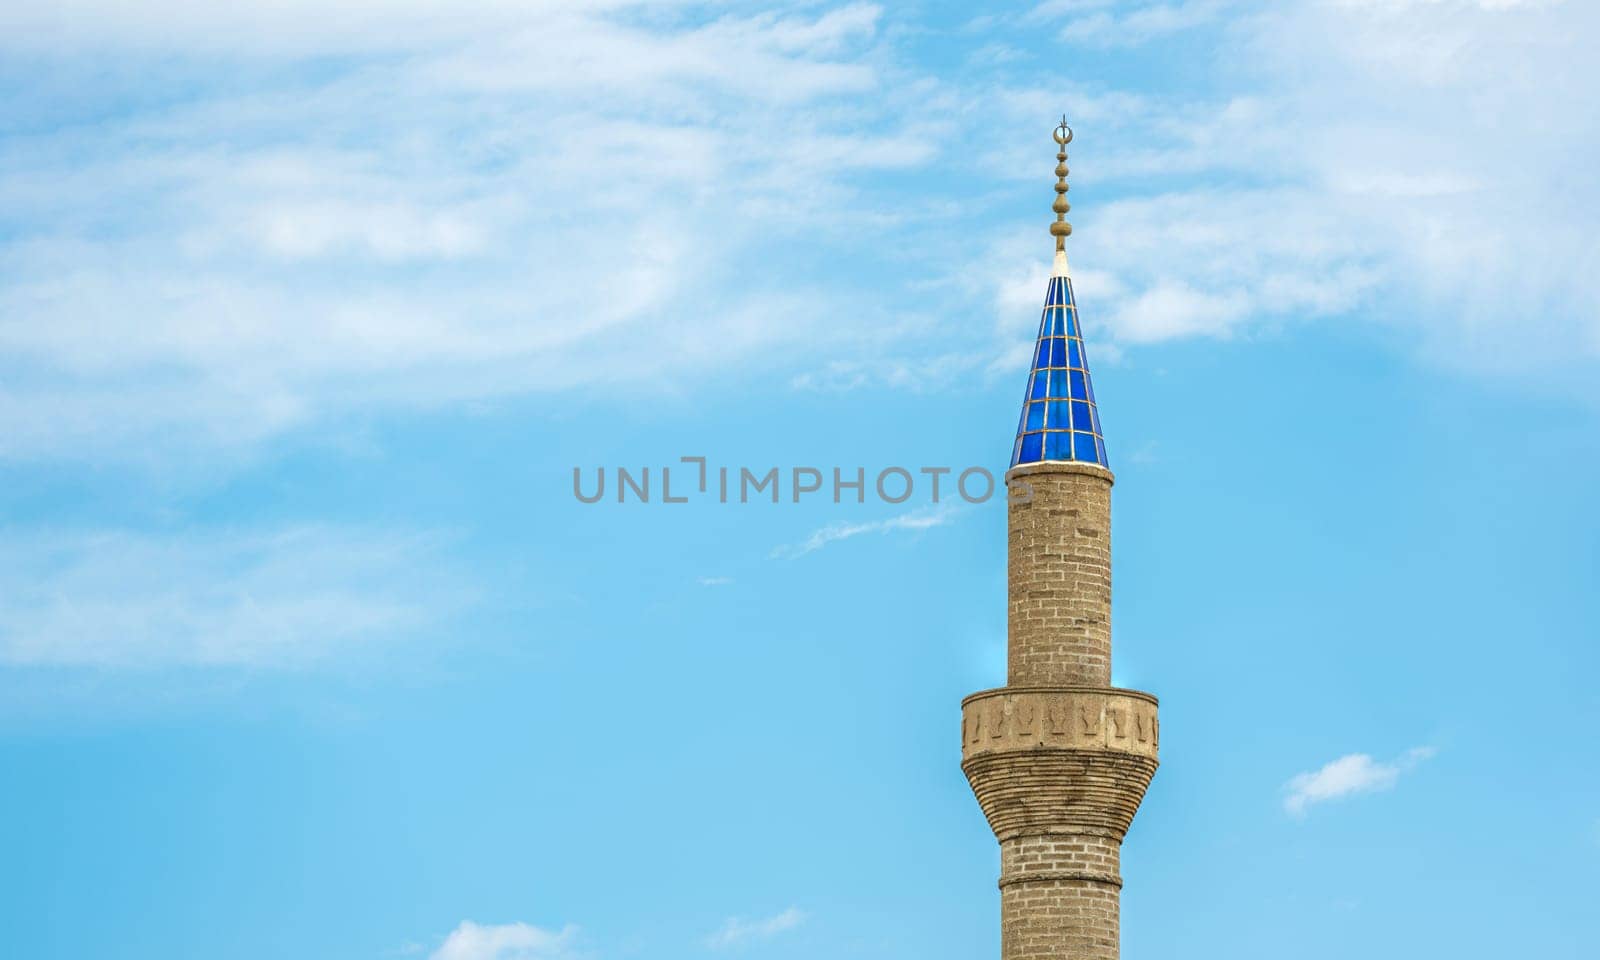 Mosque minaret with blue glass in front of a sunny, cloudless blue sky